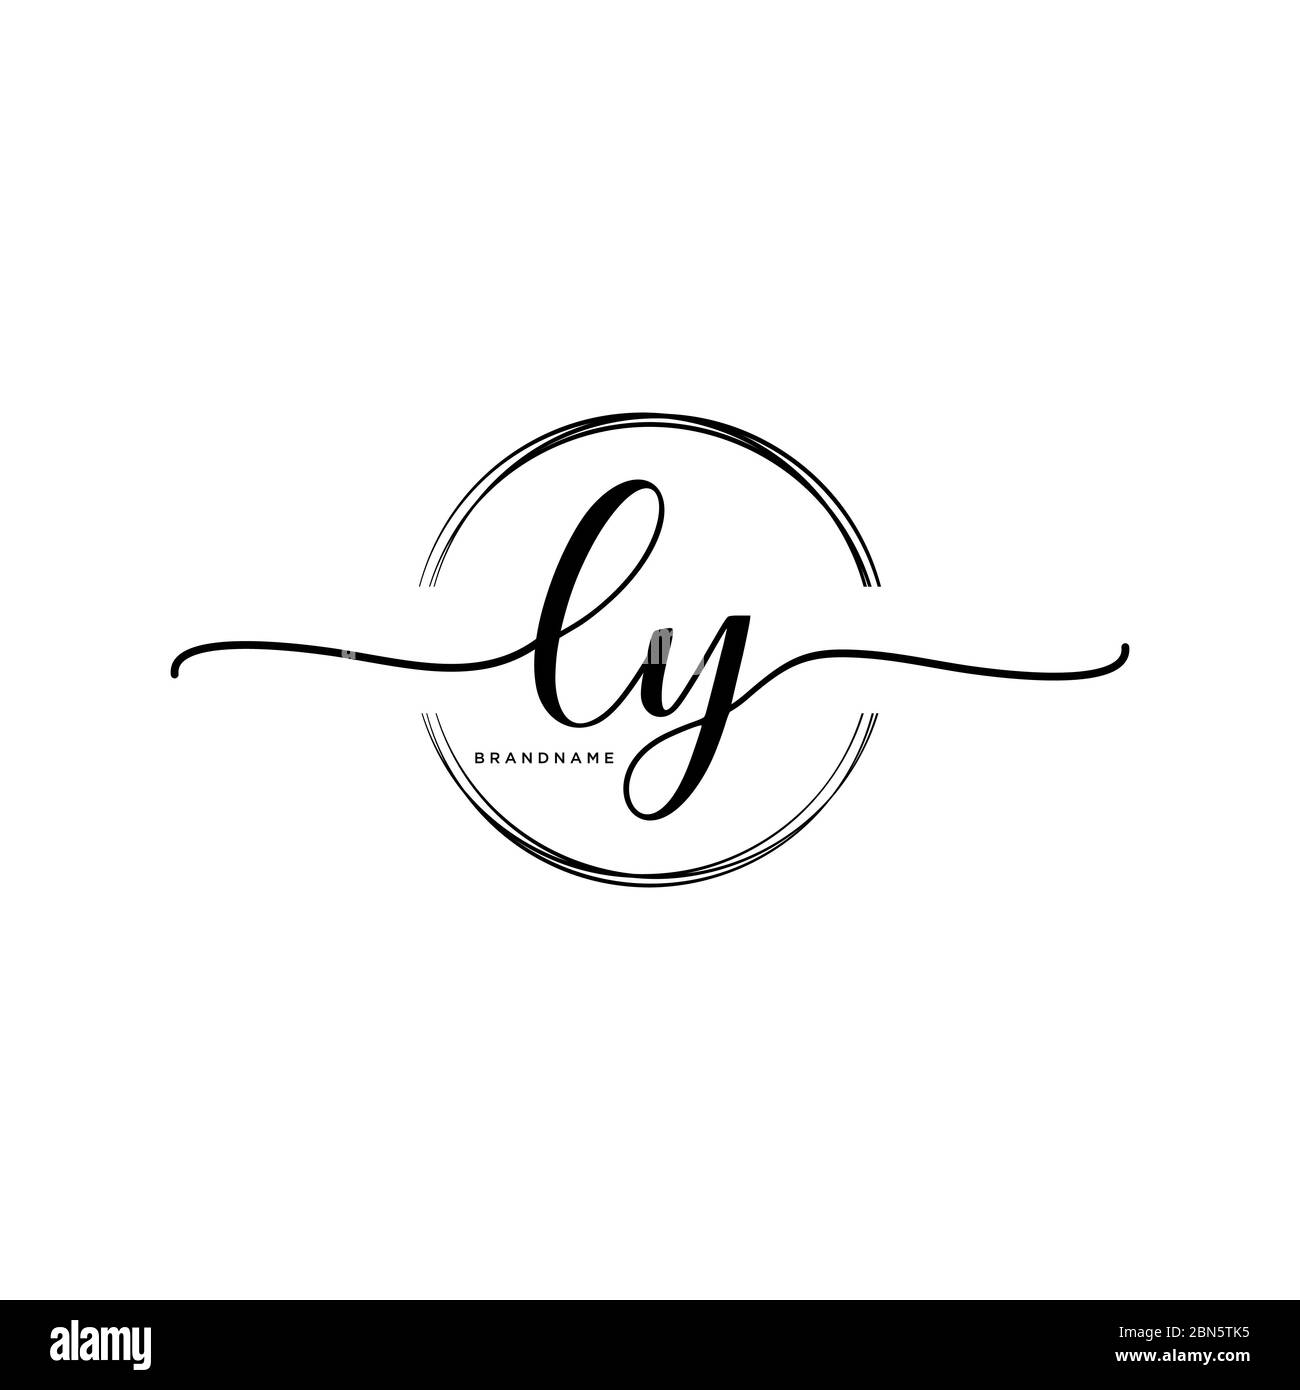 Ly Logo Cliparts, Stock Vector and Royalty Free Ly Logo Illustrations